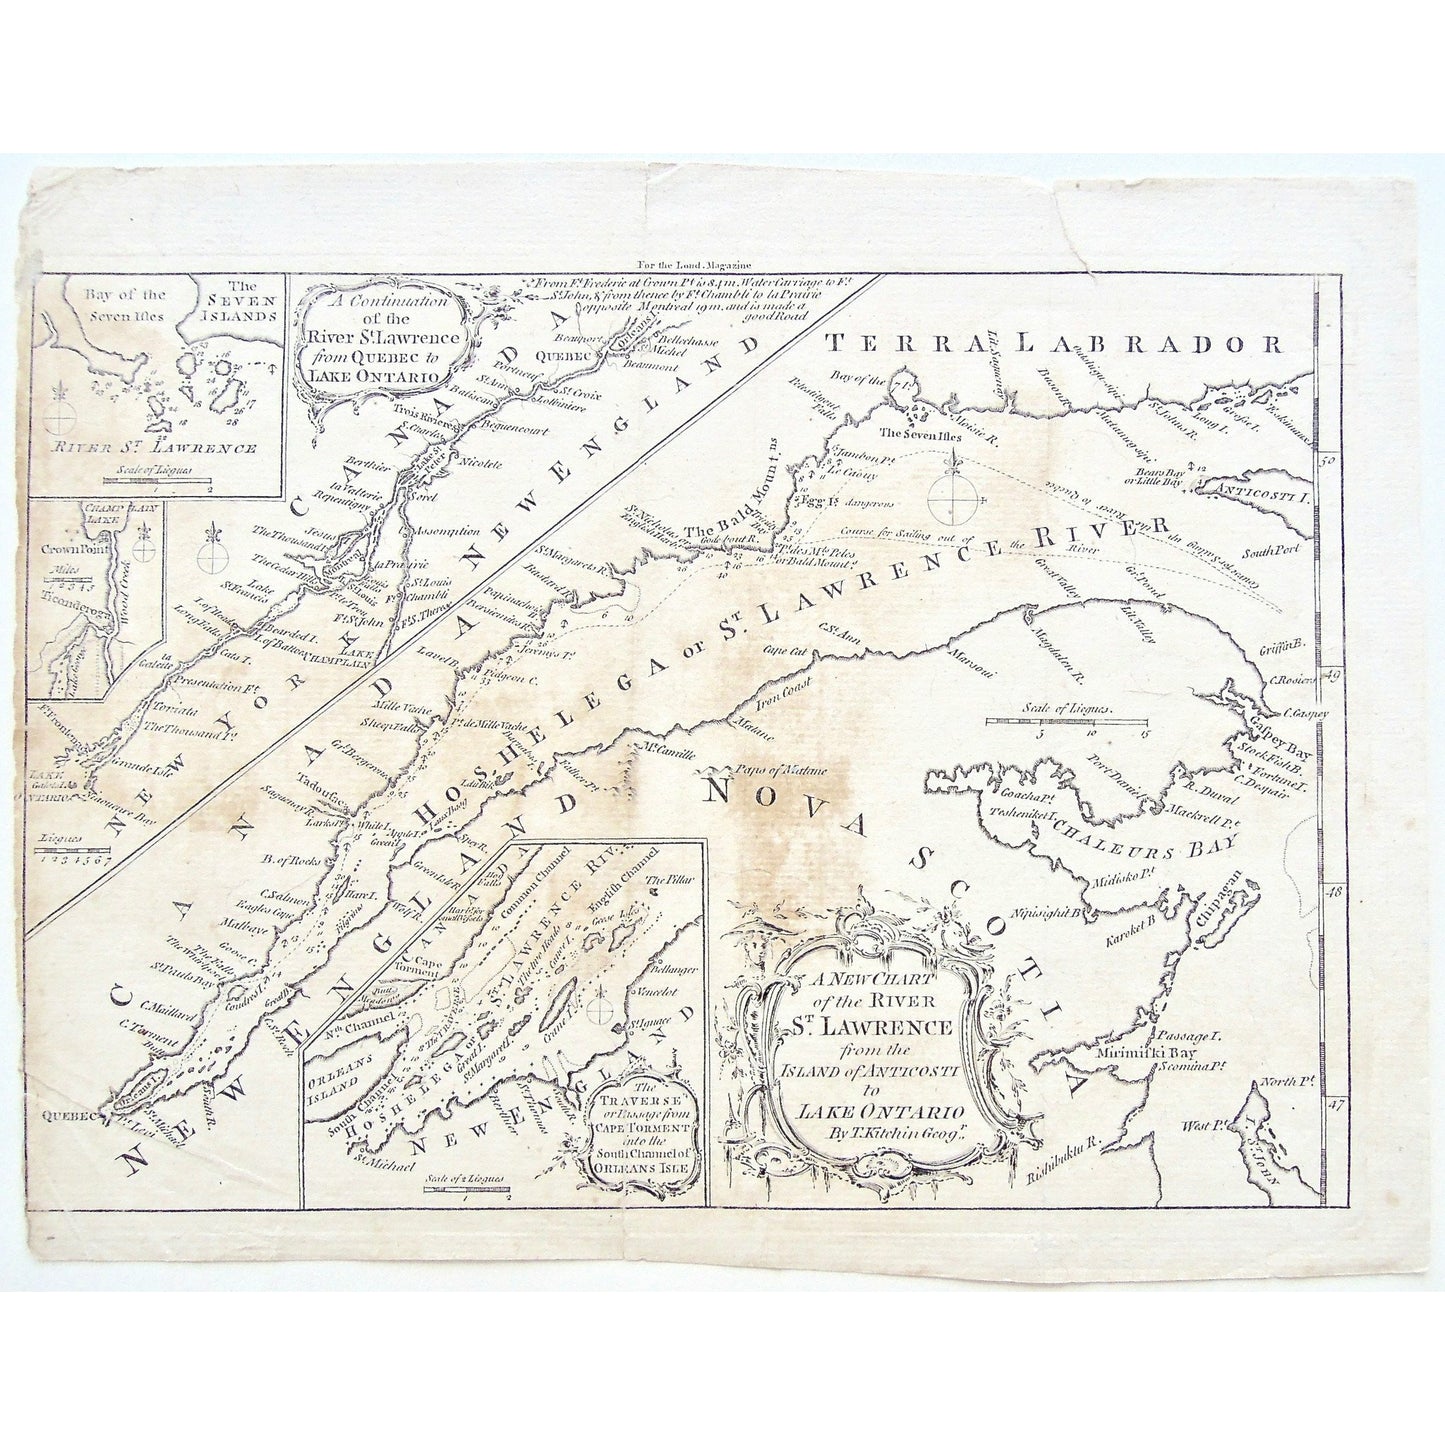 Terra Labrador, Labrador, River St. Lawrence, St. Lawrence River, Canada, New England, Nova Scotia, Hochelaga, Chart, River, Charting, Map, Maps, Bay of Seven Isles, Lake Ontario, New York, Chaleur Bay, Cape Torment, South Channel, Orleans Isle, Bald Mountains, Quebec, Canada, Anticosti, Island, Ticonderoga, Champlain, Crown Point, Lake champlain, Seven Isles, Trois Rivieres, Thomas Kitchin, Kitchin, 1759, London Magazine, London, Magazine, Mag., Map, Maps, Mapping, Chart, Charts, Charting, Copperplate, Eng